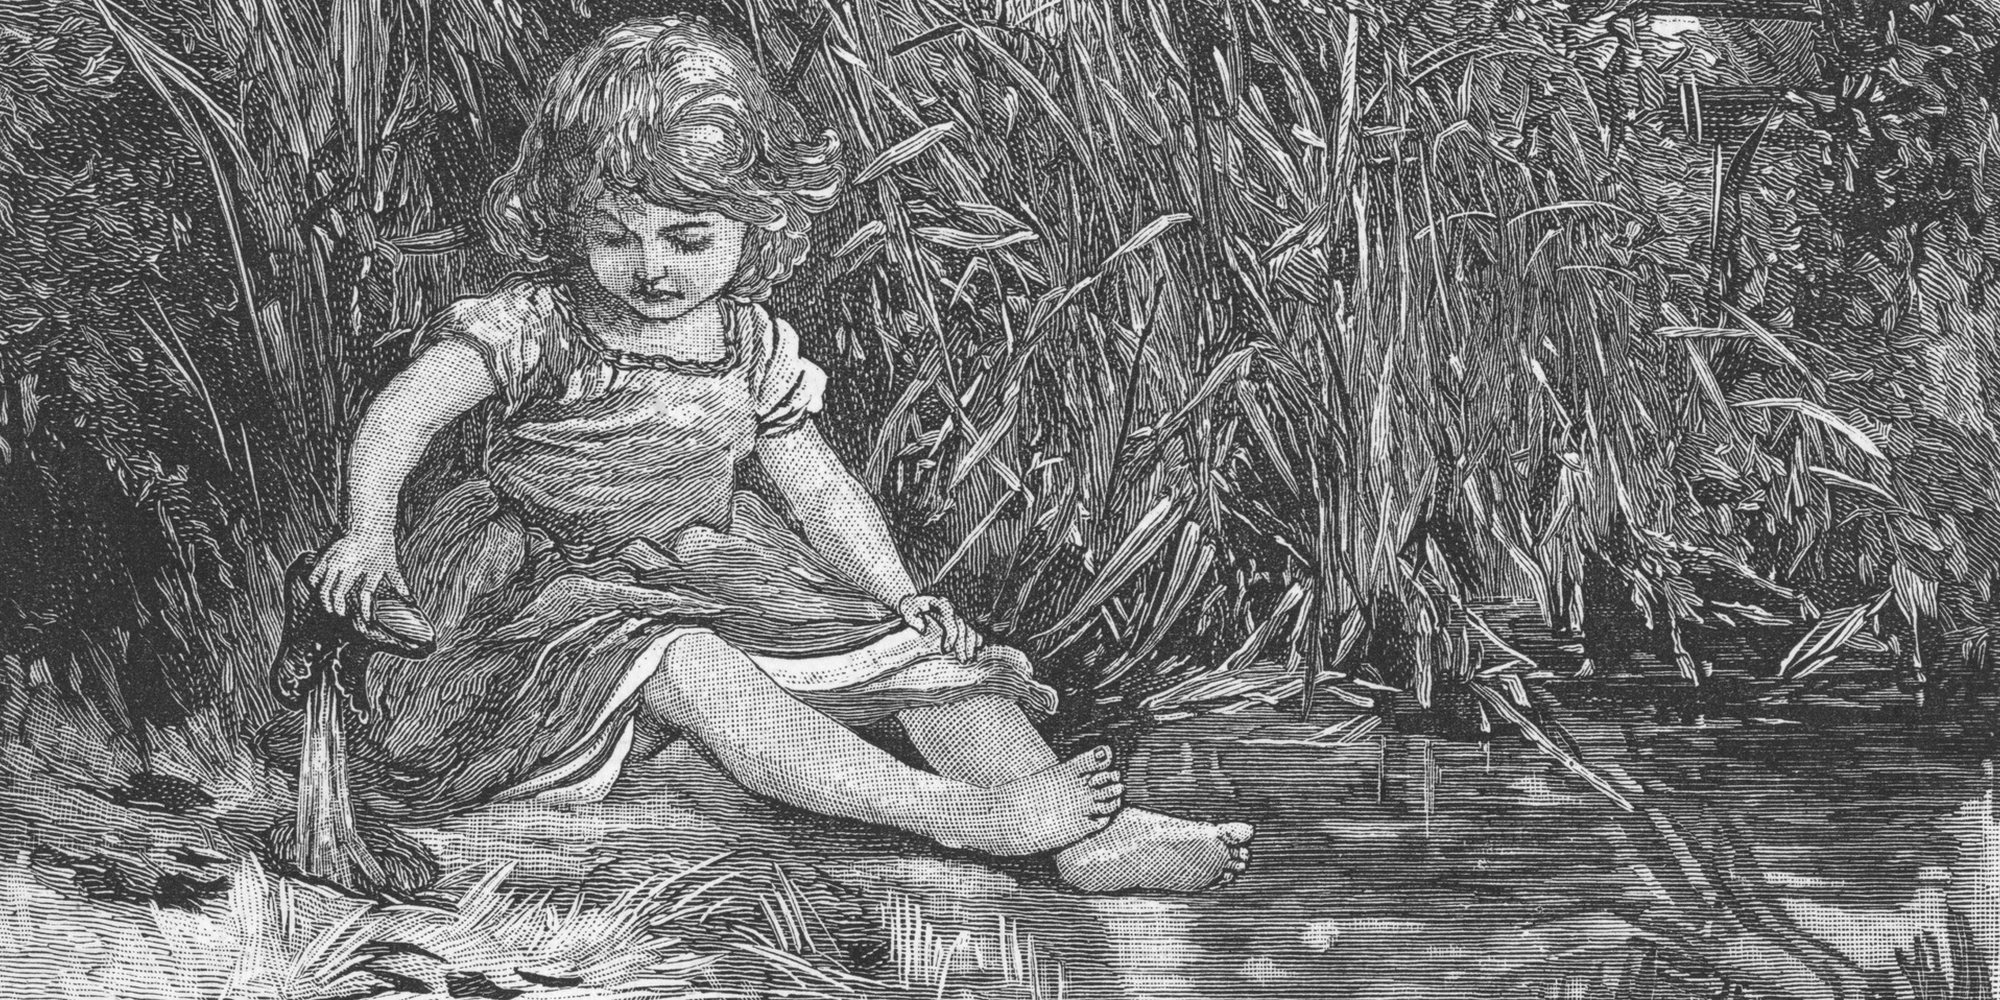 Silas Marner by George Eliot, 1861. Eppie, at the age of three, has slipped out of the house while Silas Marner was busy, and amuses herself by the pond. Illustration by Mary L.Gow (1851-1929) published 1882.